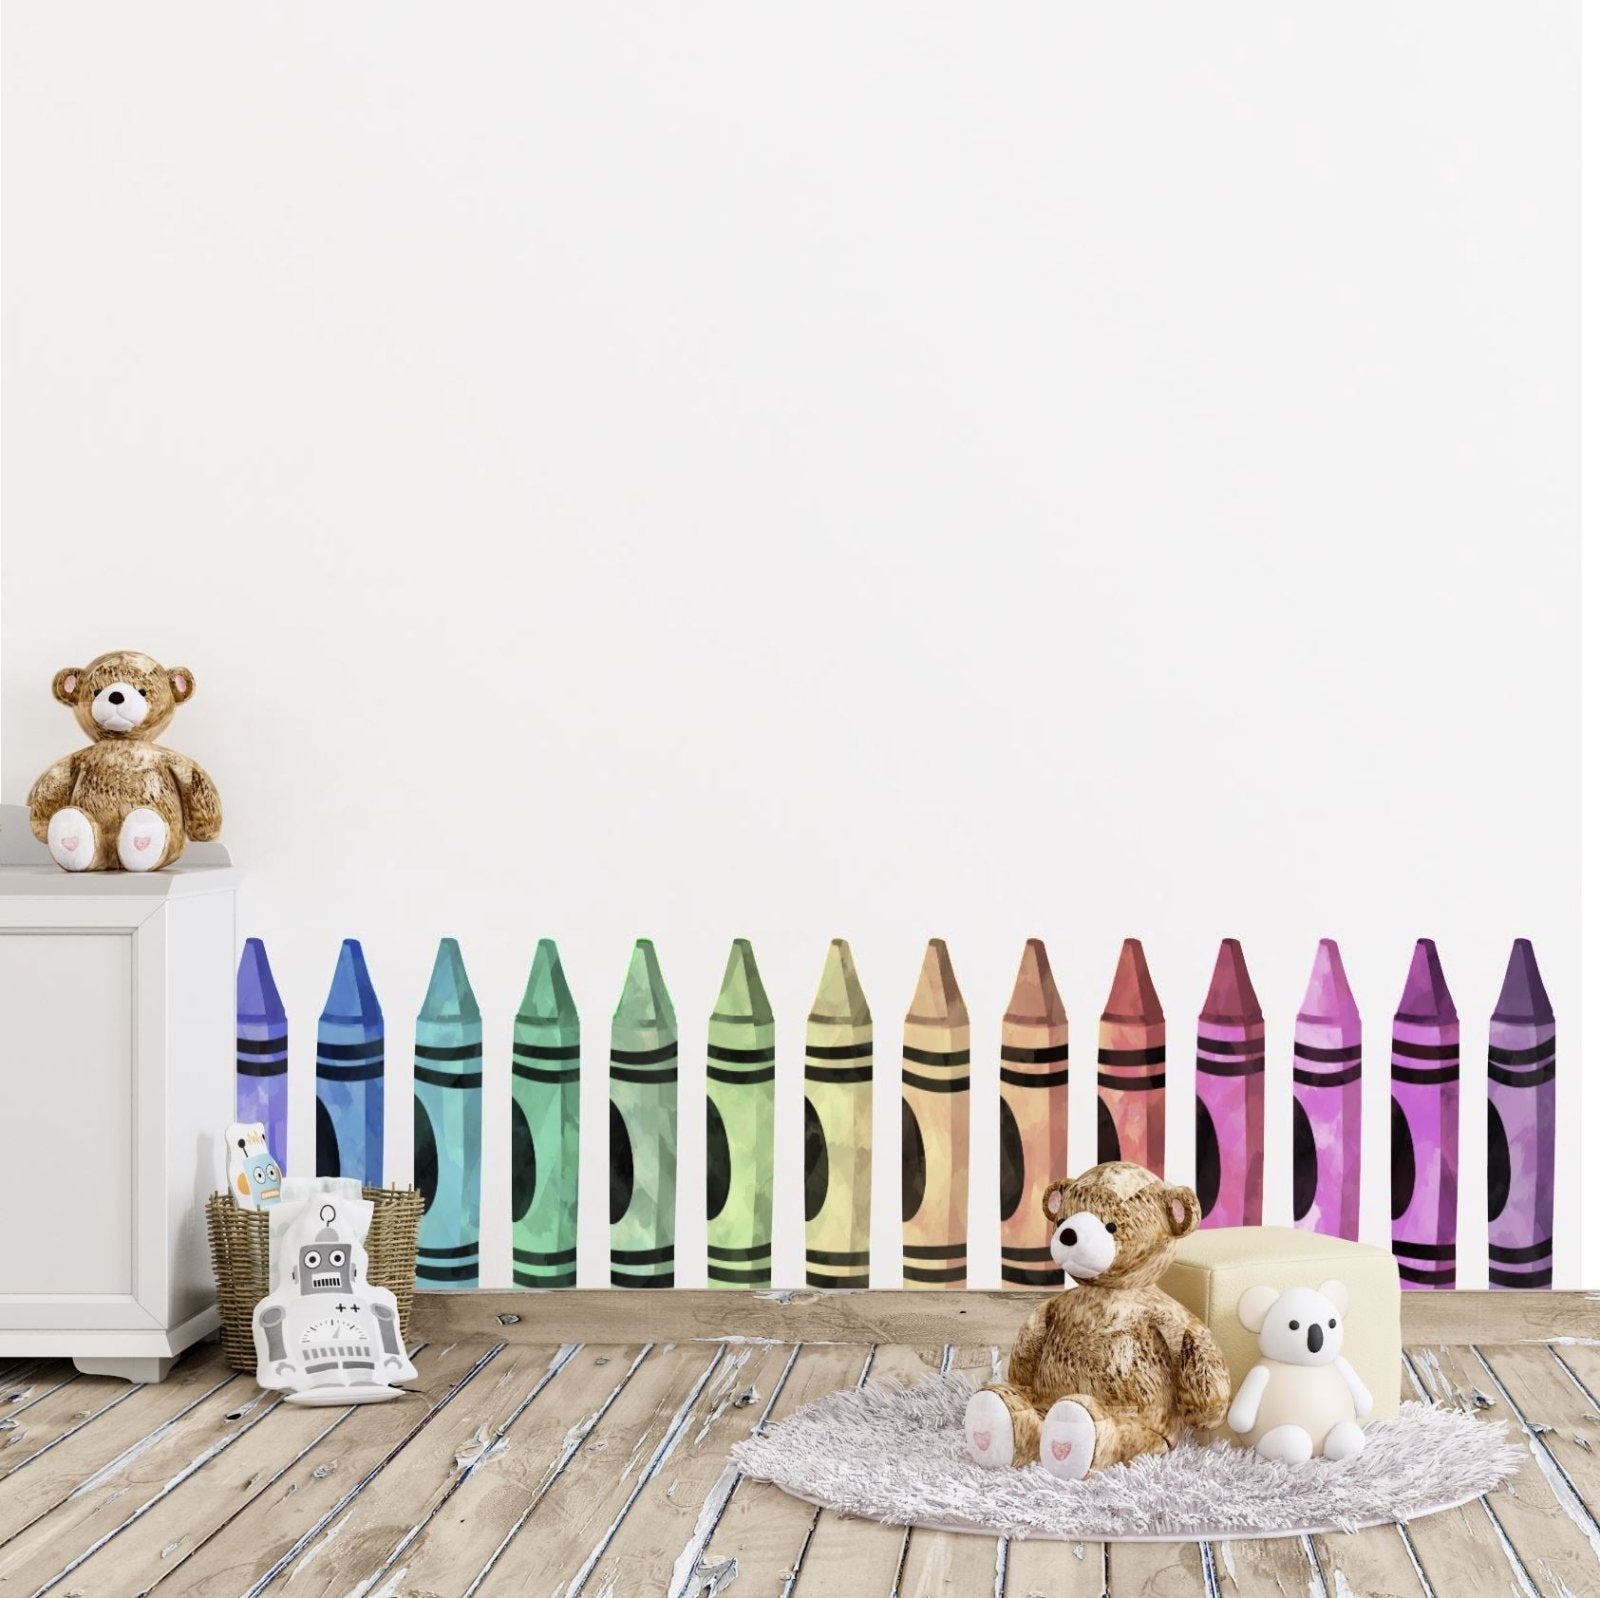 Crayon Wall Decals | Muted Rainbow Color Crayon Wall Stickers - Home Decor Decals - Picture Perfect Decals